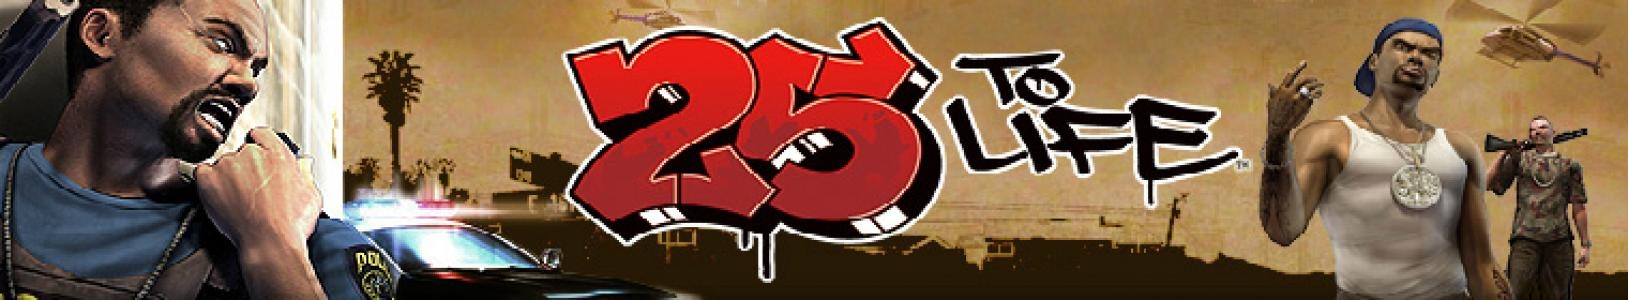 25 To Life banner